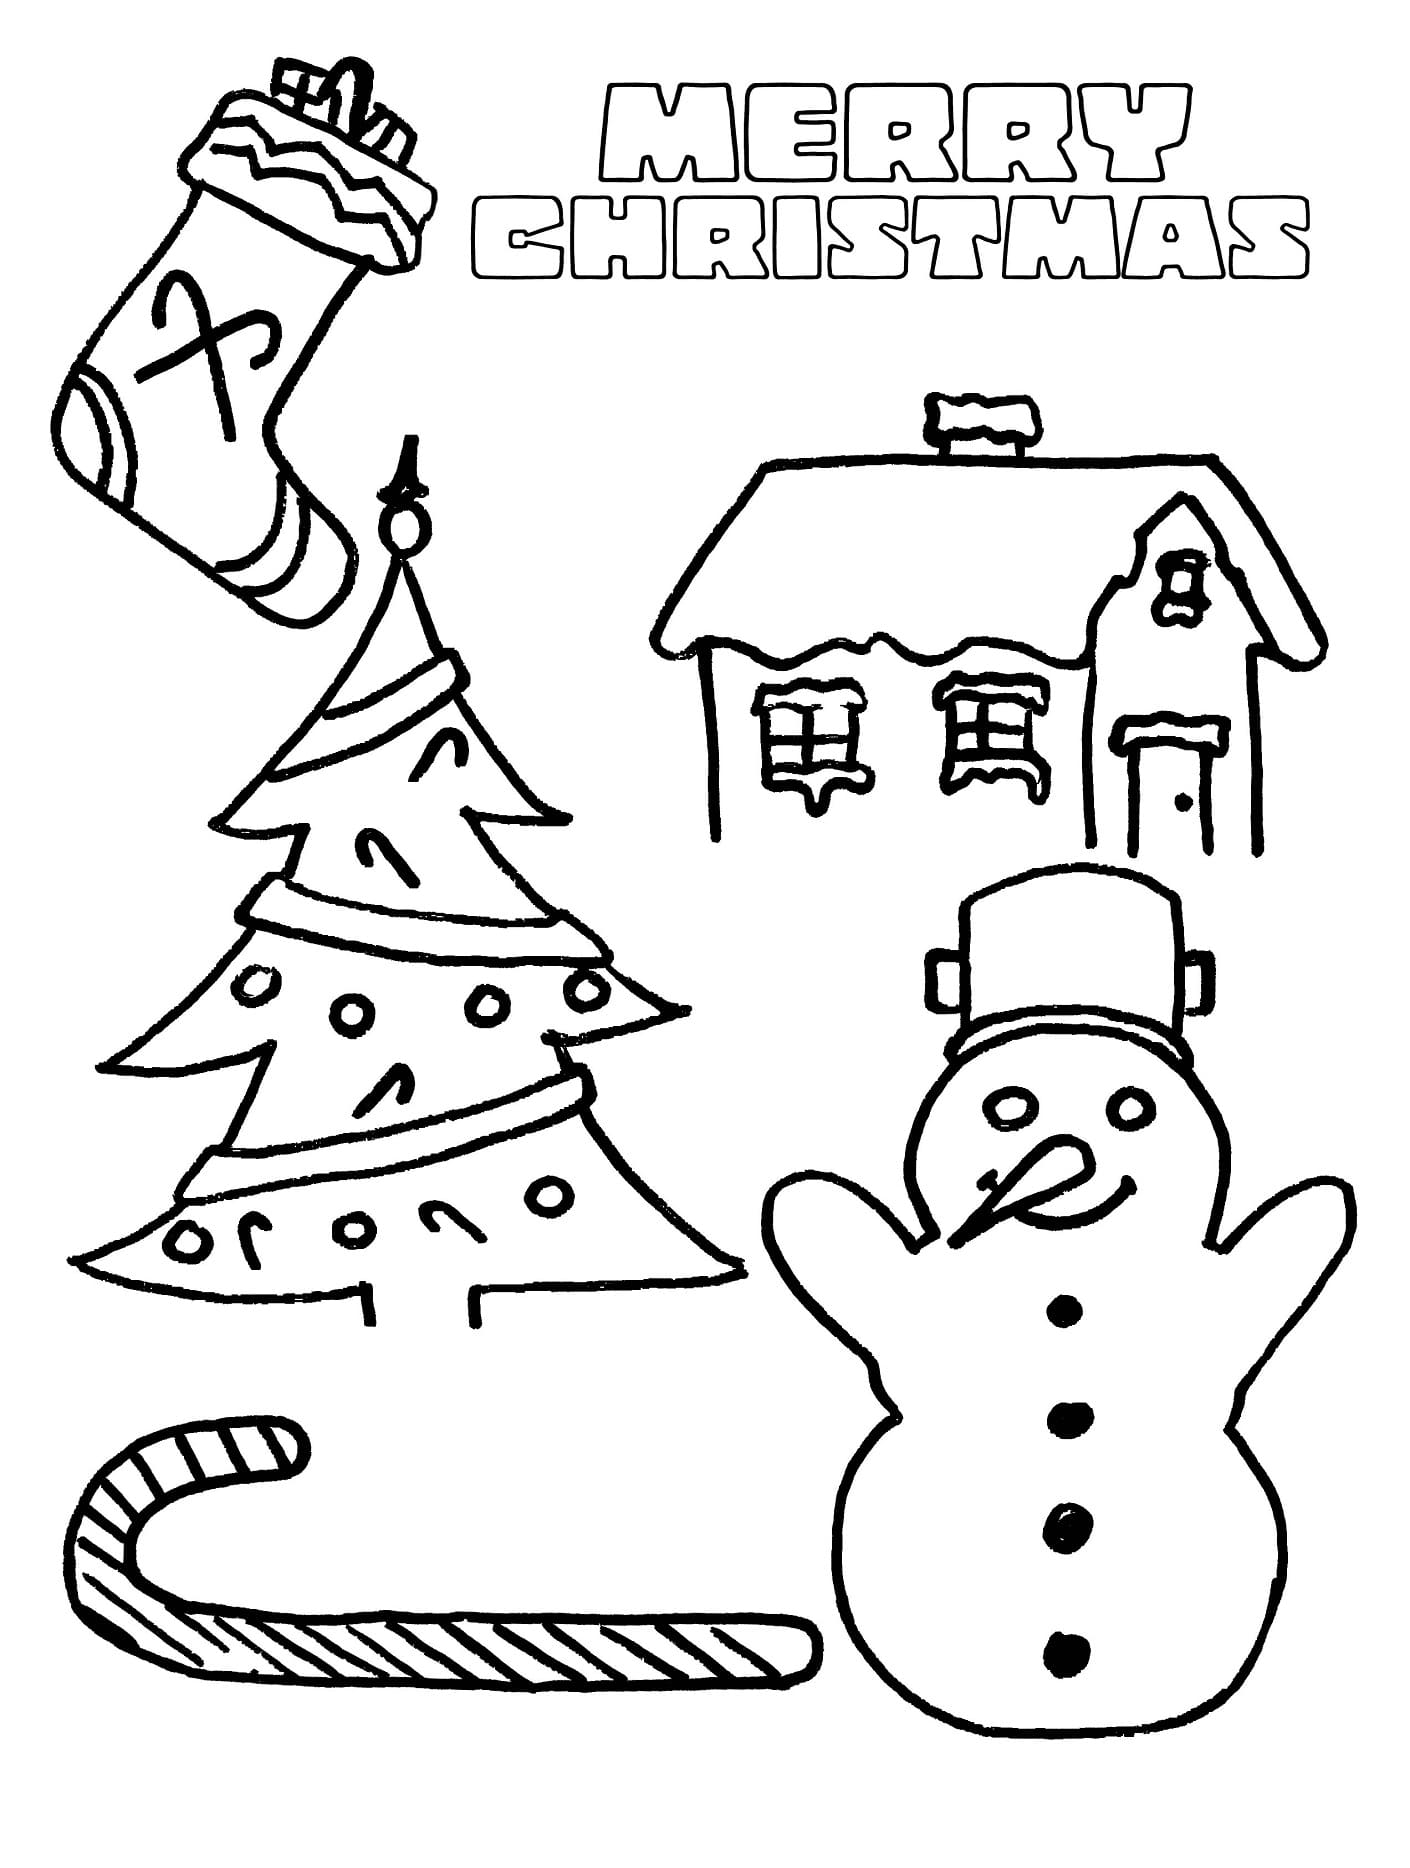 Print Christmas Card Coloring Page - Download, Print Or Color Online 